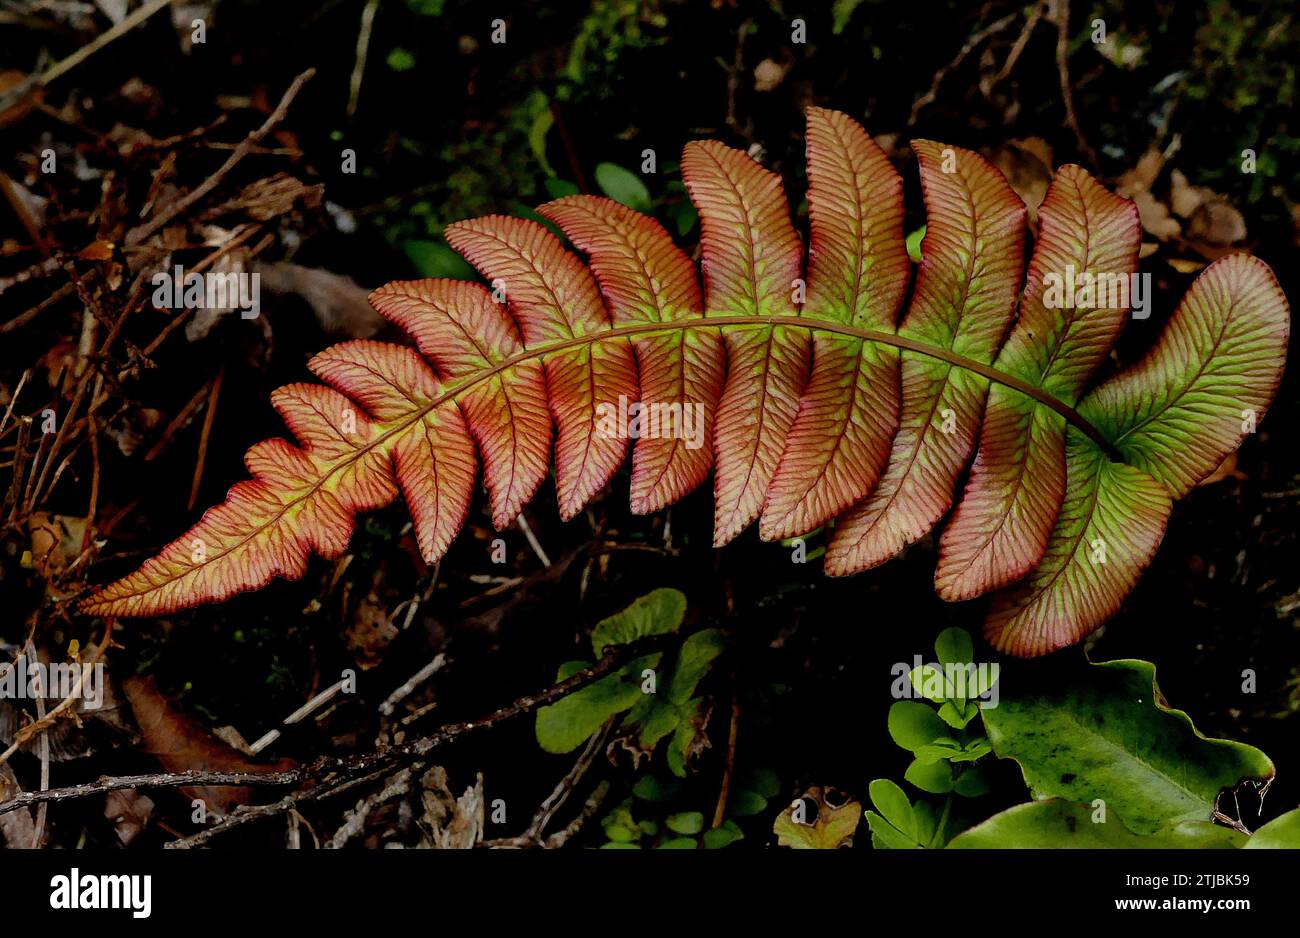 Kiokoi. New Zealand fern. Blechnum novae-zelandiae, commonly known as palm-leaf fern or kiokio, is a species of fern found in New Zealand. It can often be found growing in clay soil on embankments and roadsides. B. novae-zelandiae has long fronds that grow up to 2m long by 50 cm wide. An evergreen fern with short creeping rhizomes bearing large bright green, wavy leaflets on pendulous sterile fronds. Young growth is often orange to deep red. Jamestown, Southland, New Zealand  Credit: BSpragg Stock Photo